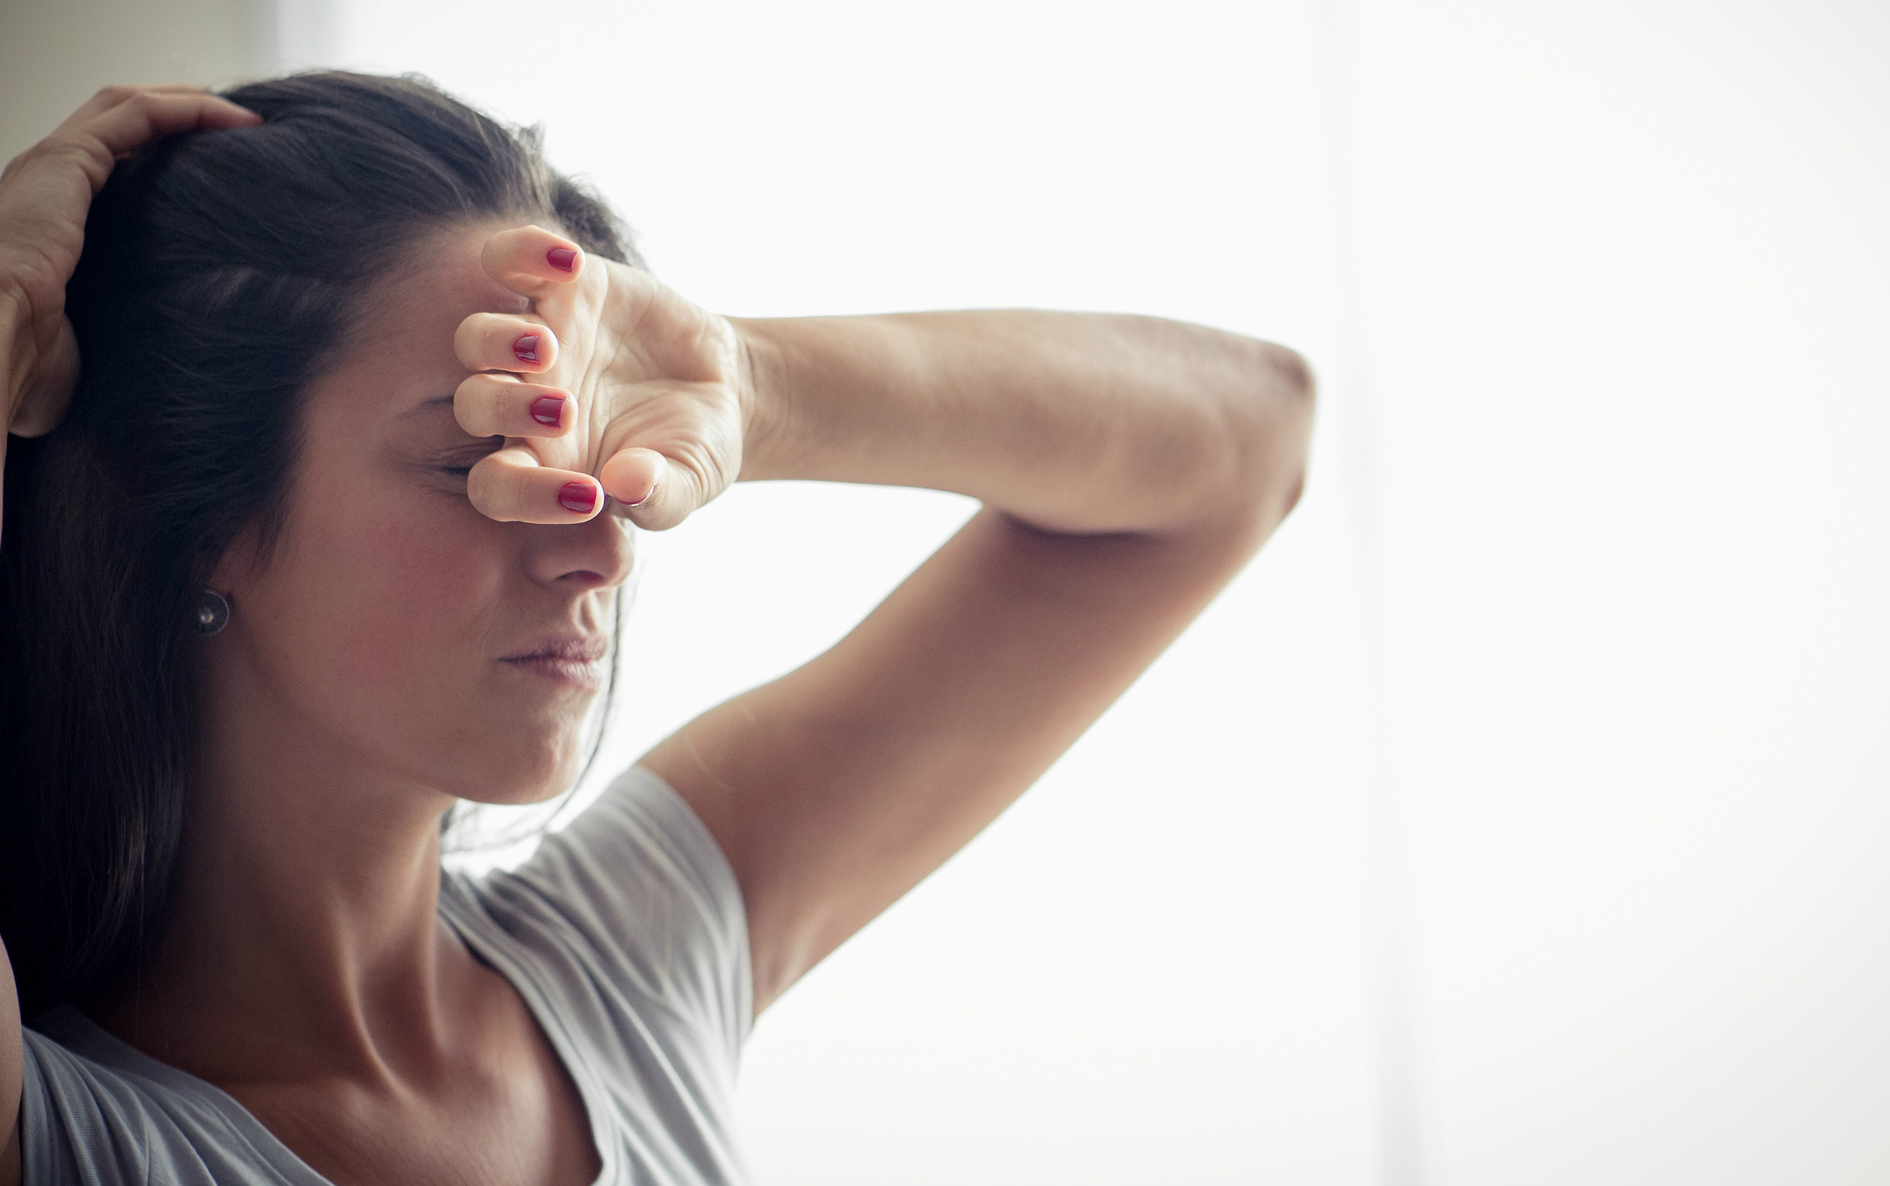 Have a Headache? Try These Home Remedies for Relief